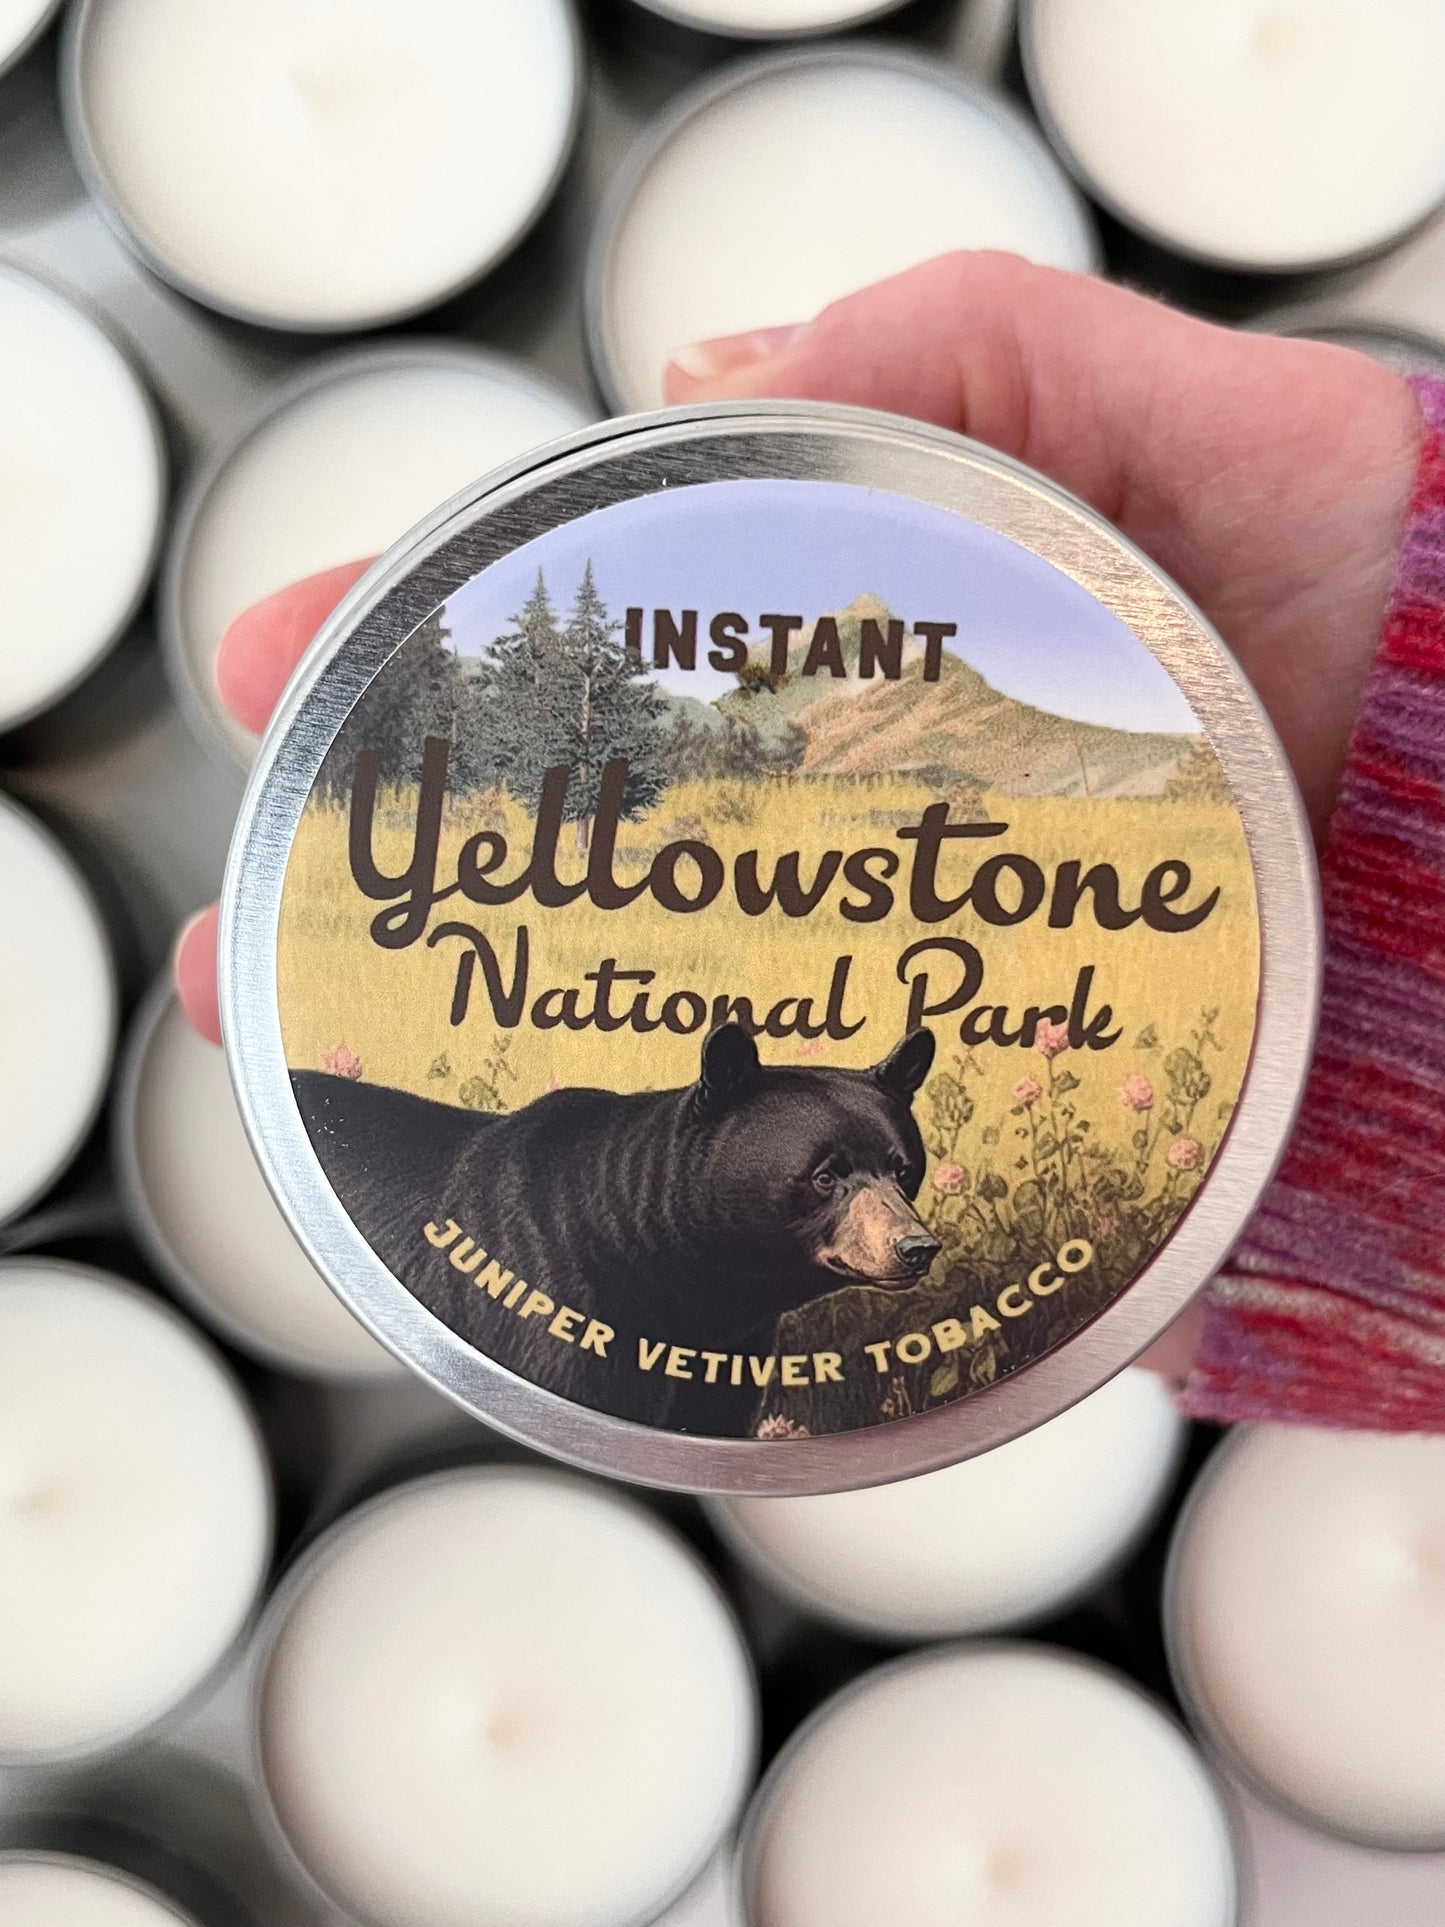 instant yellowstone national park scented candle juniper vetiver tobacco grassland mountain pine tree bear decorative nature lover 